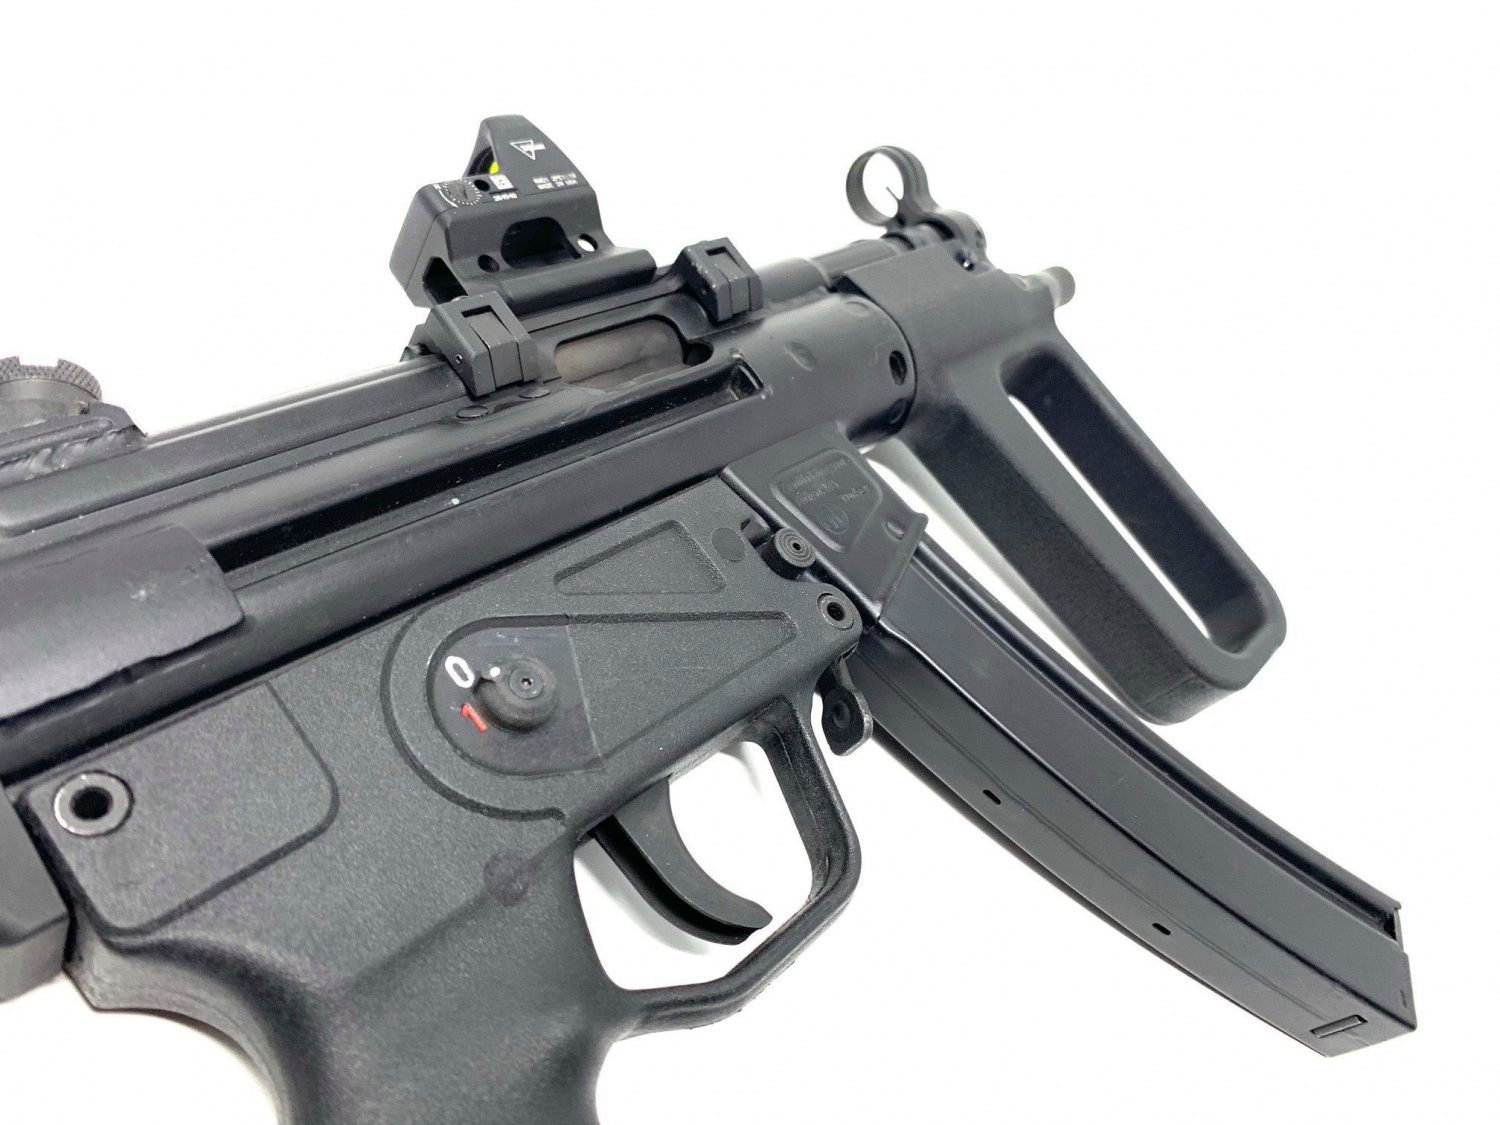 Phoenix, AZ, has made the H&K Prototype VFG (Vertical Fore Grip) for th...